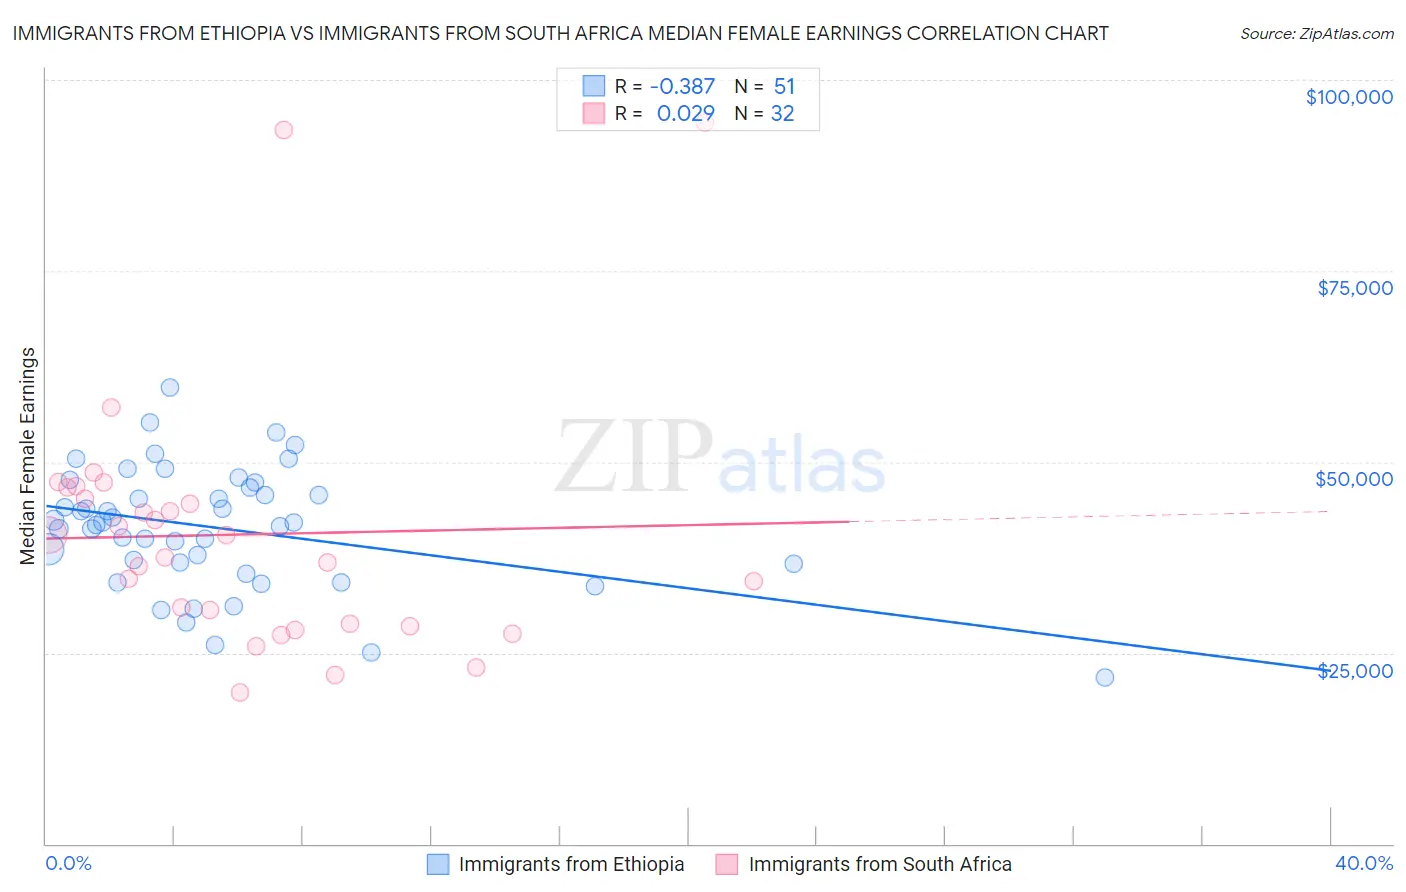 Immigrants from Ethiopia vs Immigrants from South Africa Median Female Earnings